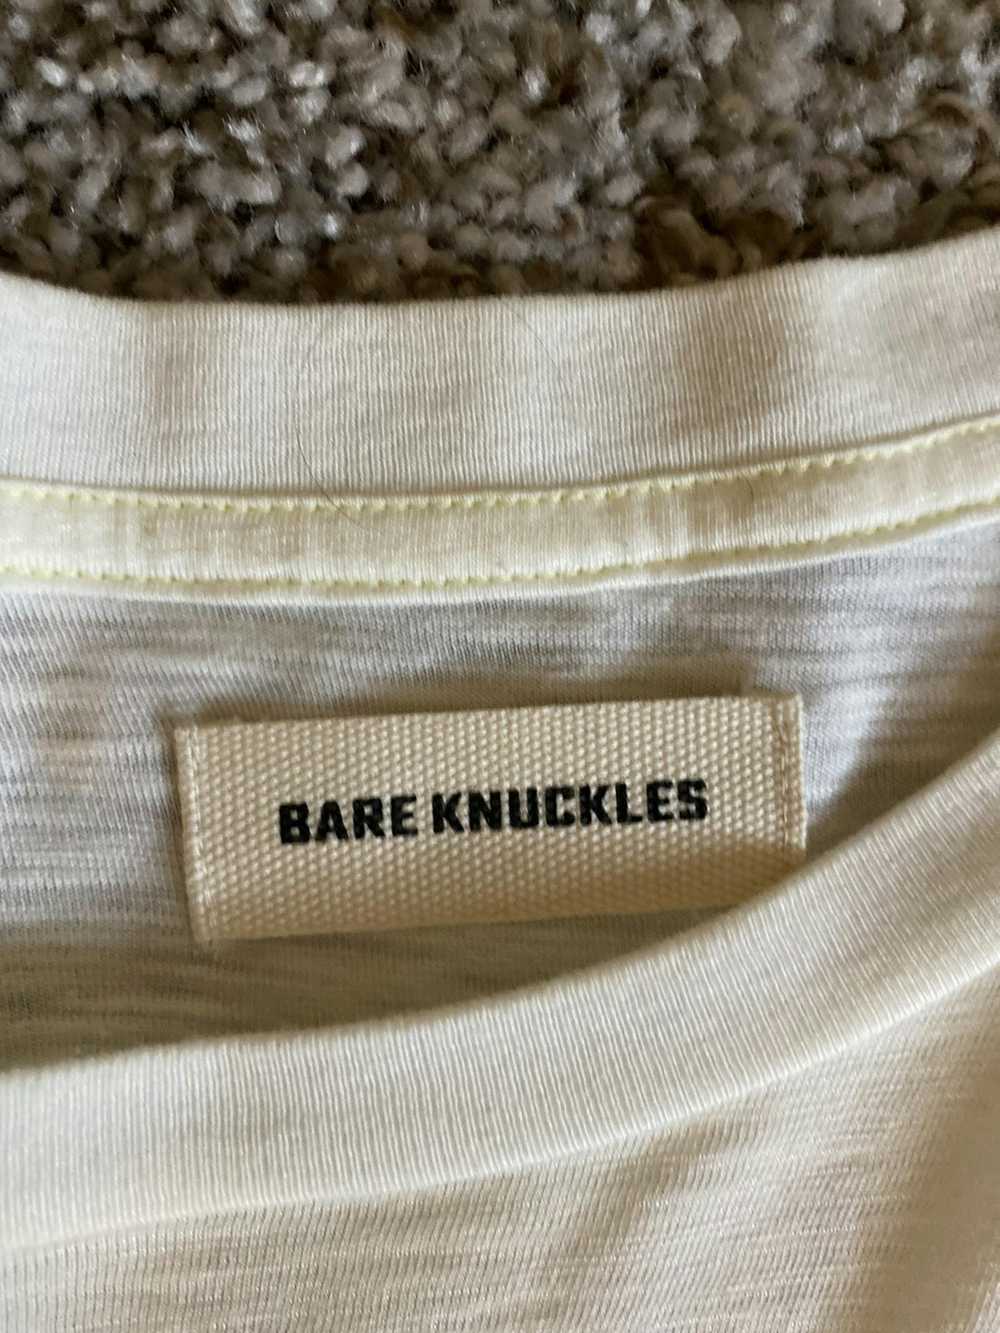 Bare Knuckles Bare Knuckles Cream Cropped Shirt - image 2